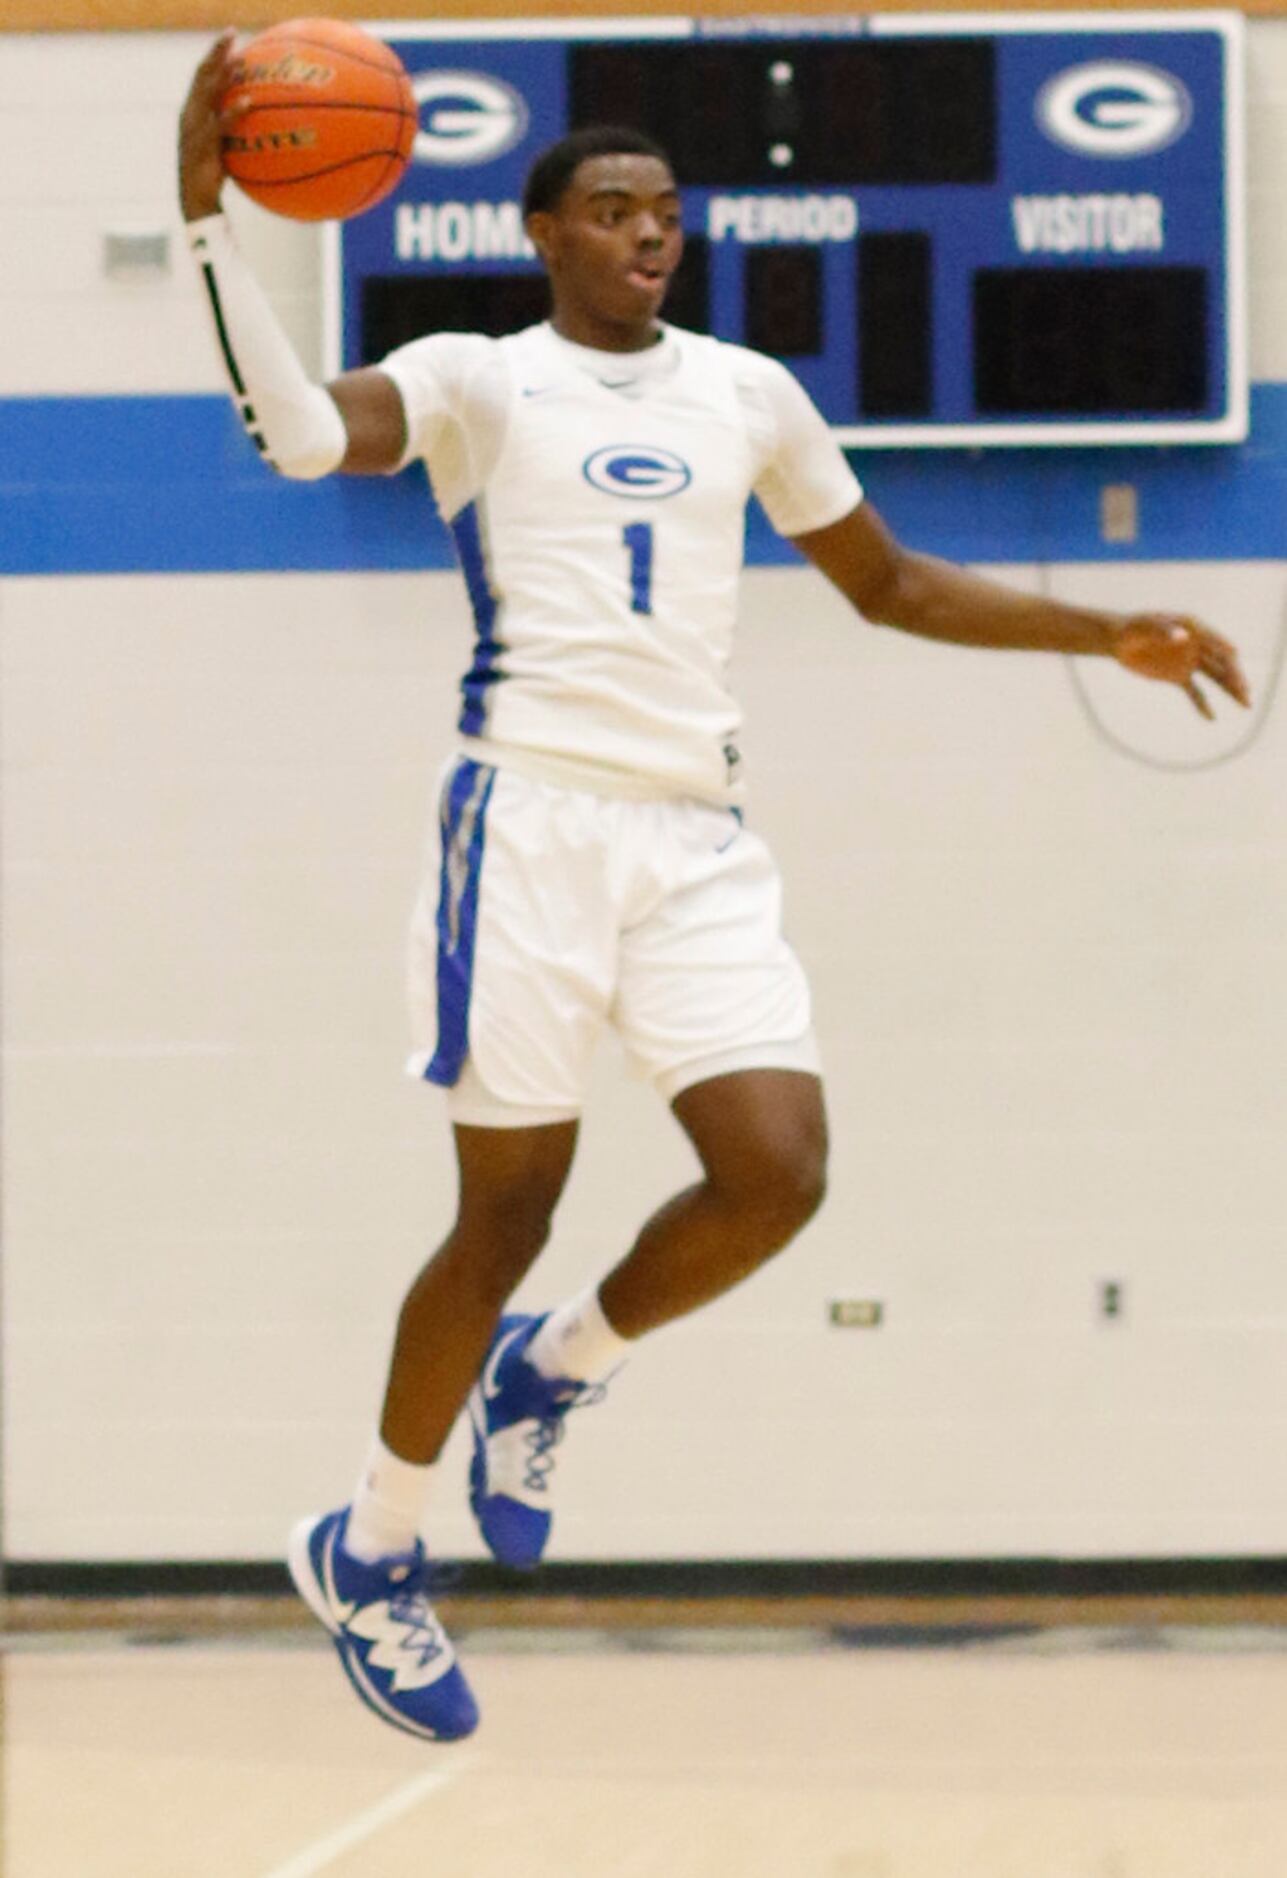 Grand Prairie's Jaylin Posey (1) leaps to pull in a high pass from a teammate during first...